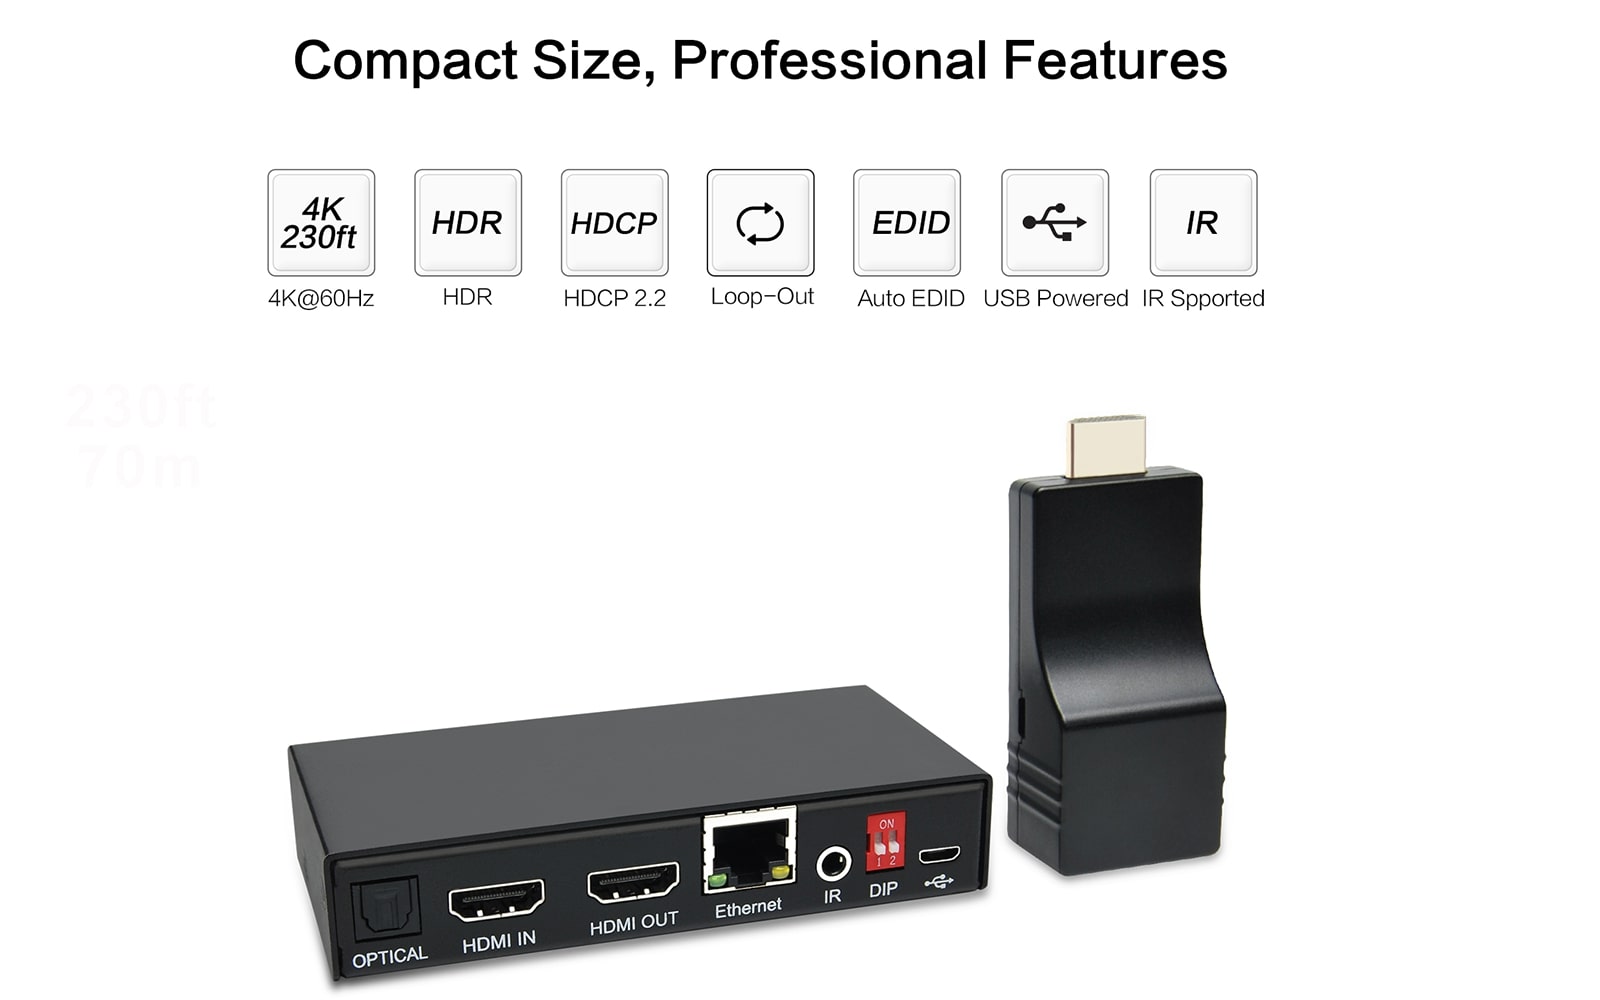 HE-35IR 4K HDMI Transmitter and Receiver - compact size